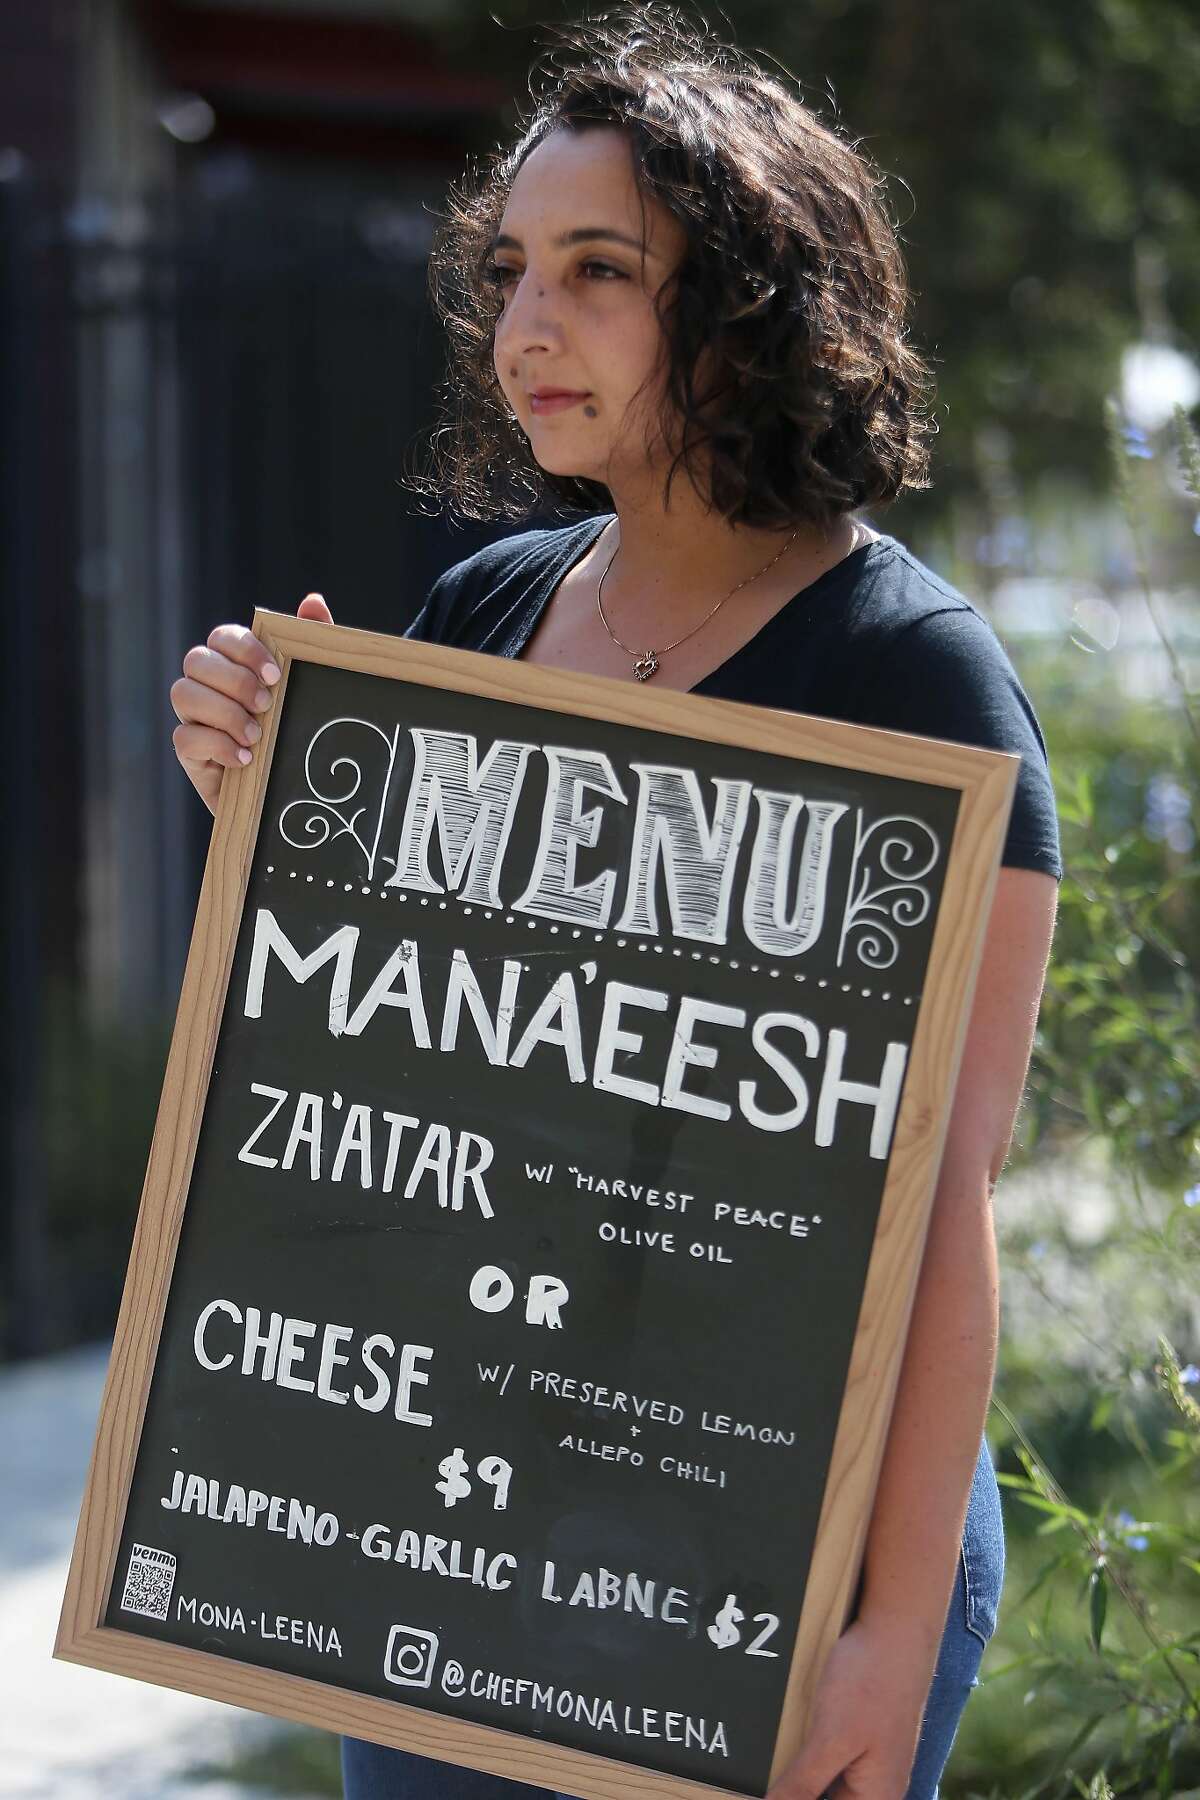 Mona Leena Michael of Oakland stands for a portrait outside the Bakery Lofts on Wednesday, September 16, 2020 in Oakland Calif. Michael, who is a chef, was selling flatbreads and other foods in front of her live/ work space at a pop up in Oakland before the health department shut her down for lack of a permit.